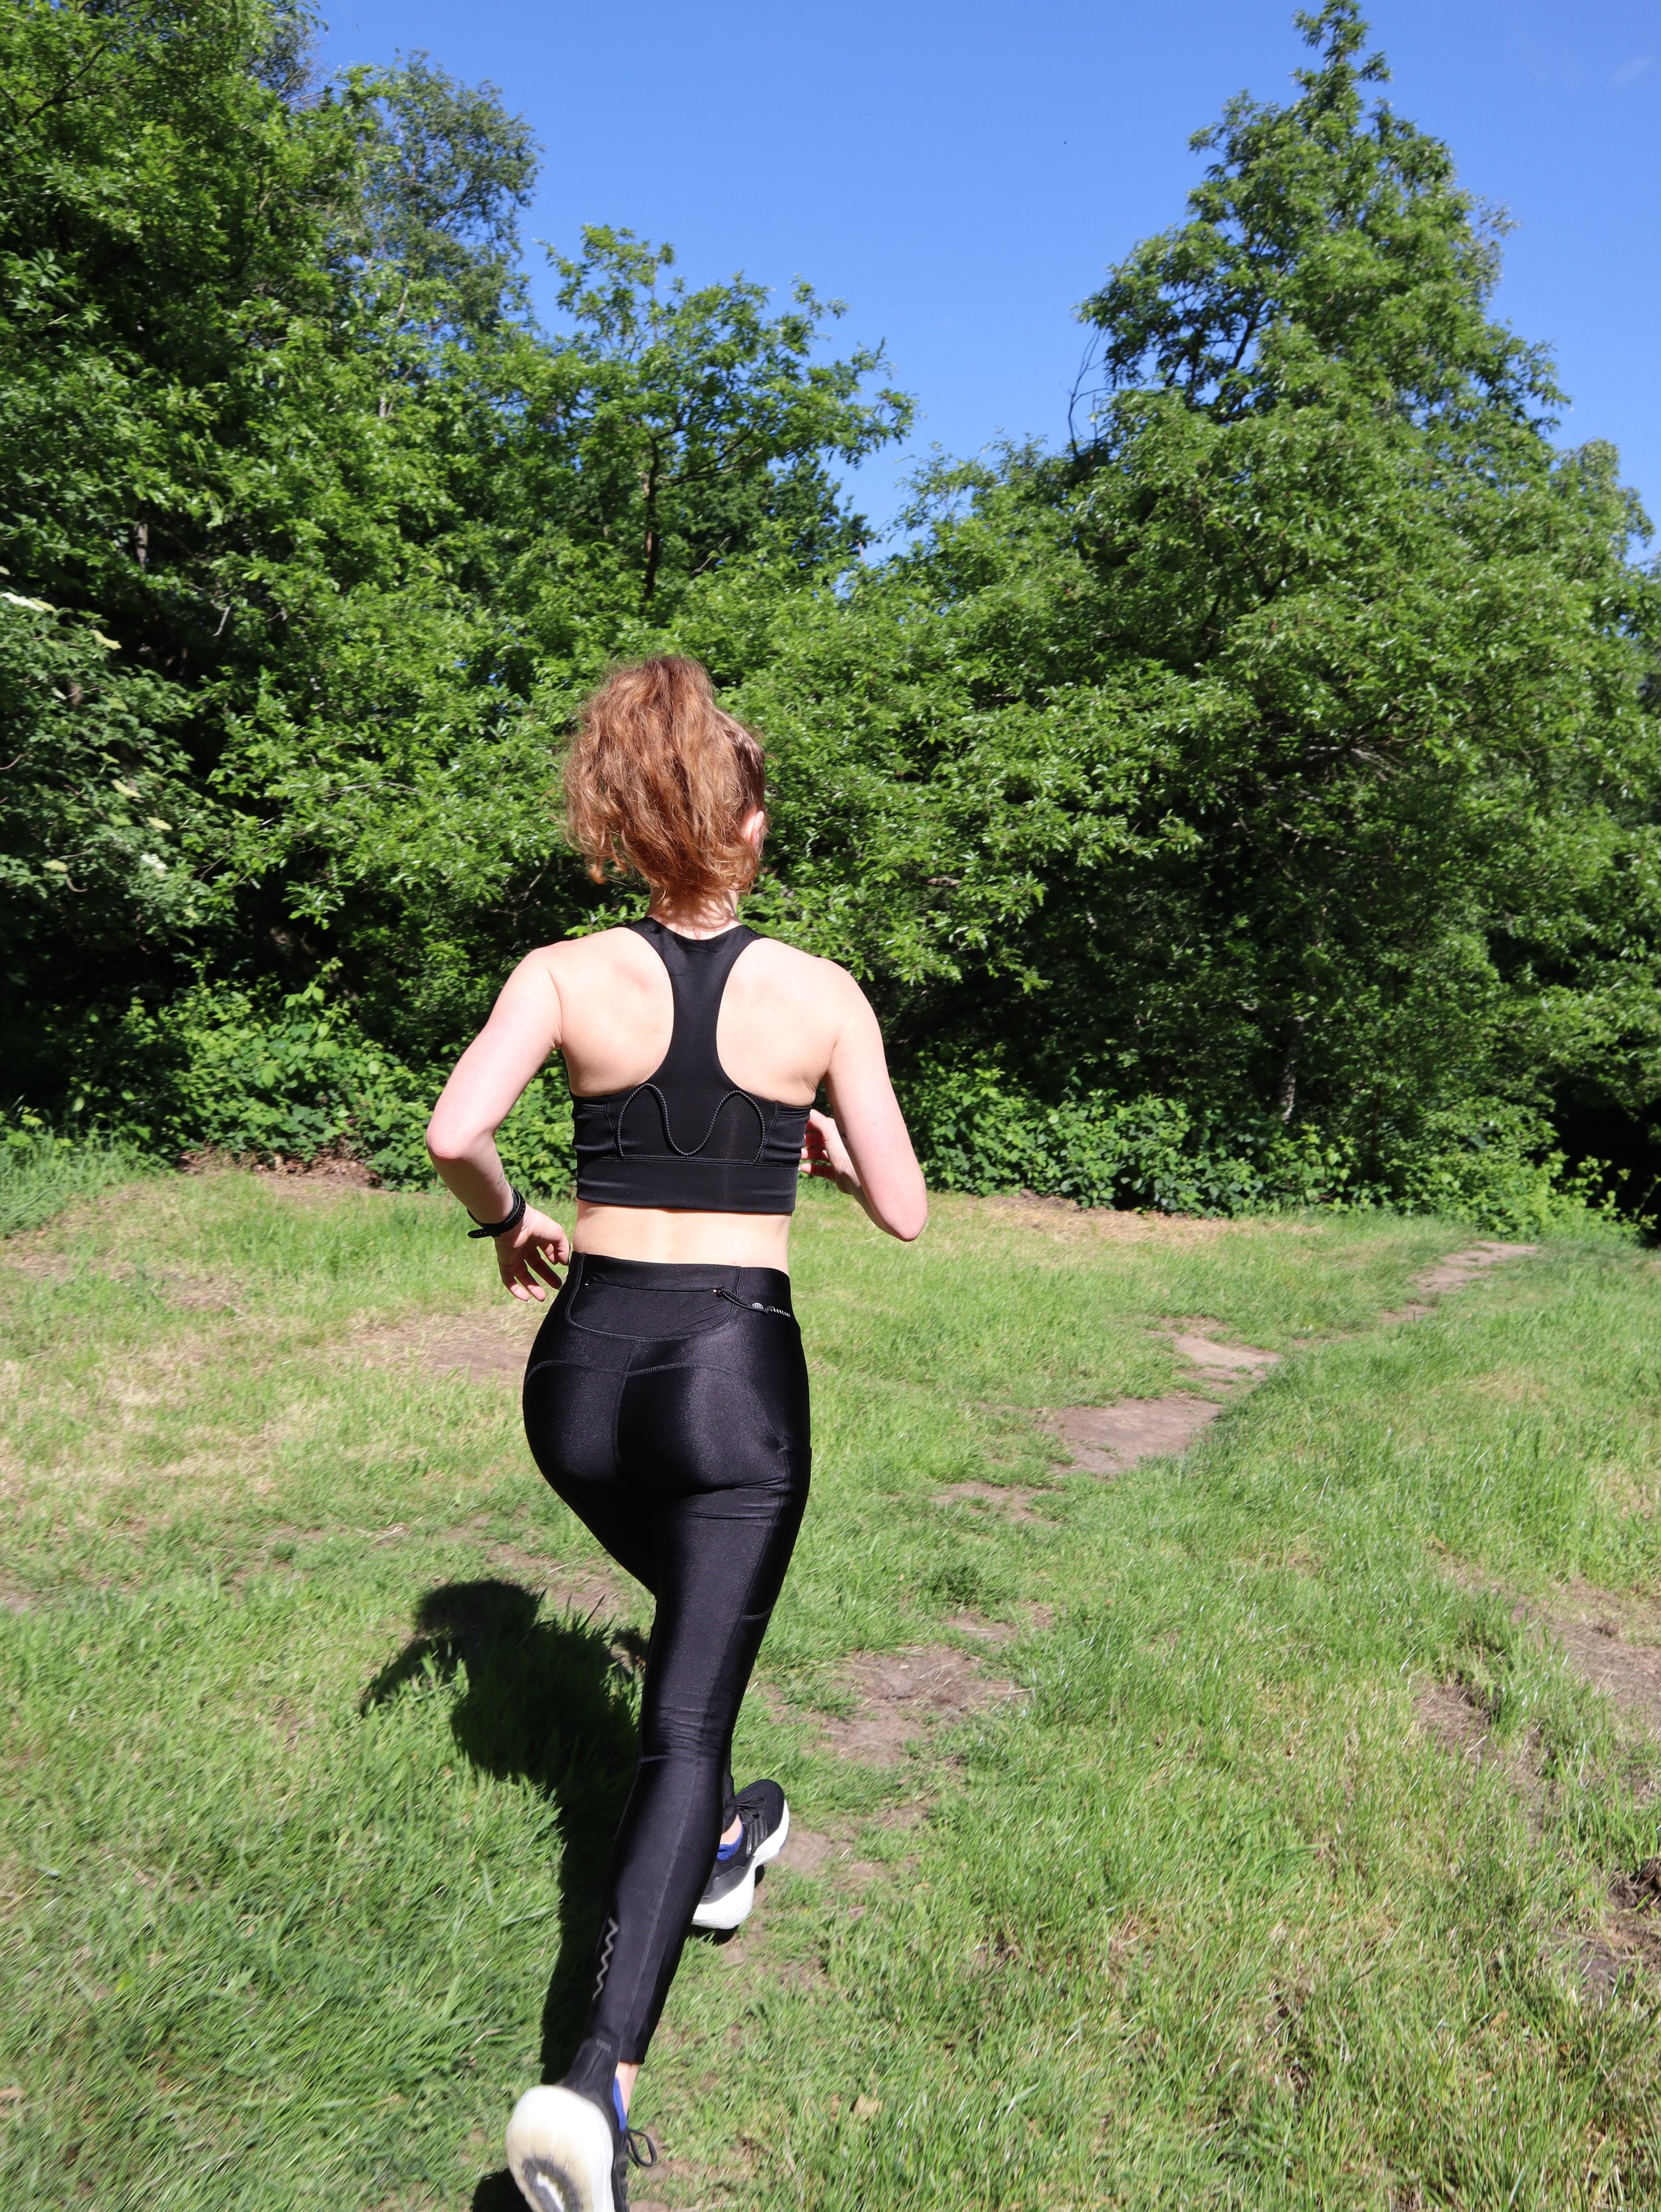 The best adidas running leggings with phone pockets | adidas running kit  review